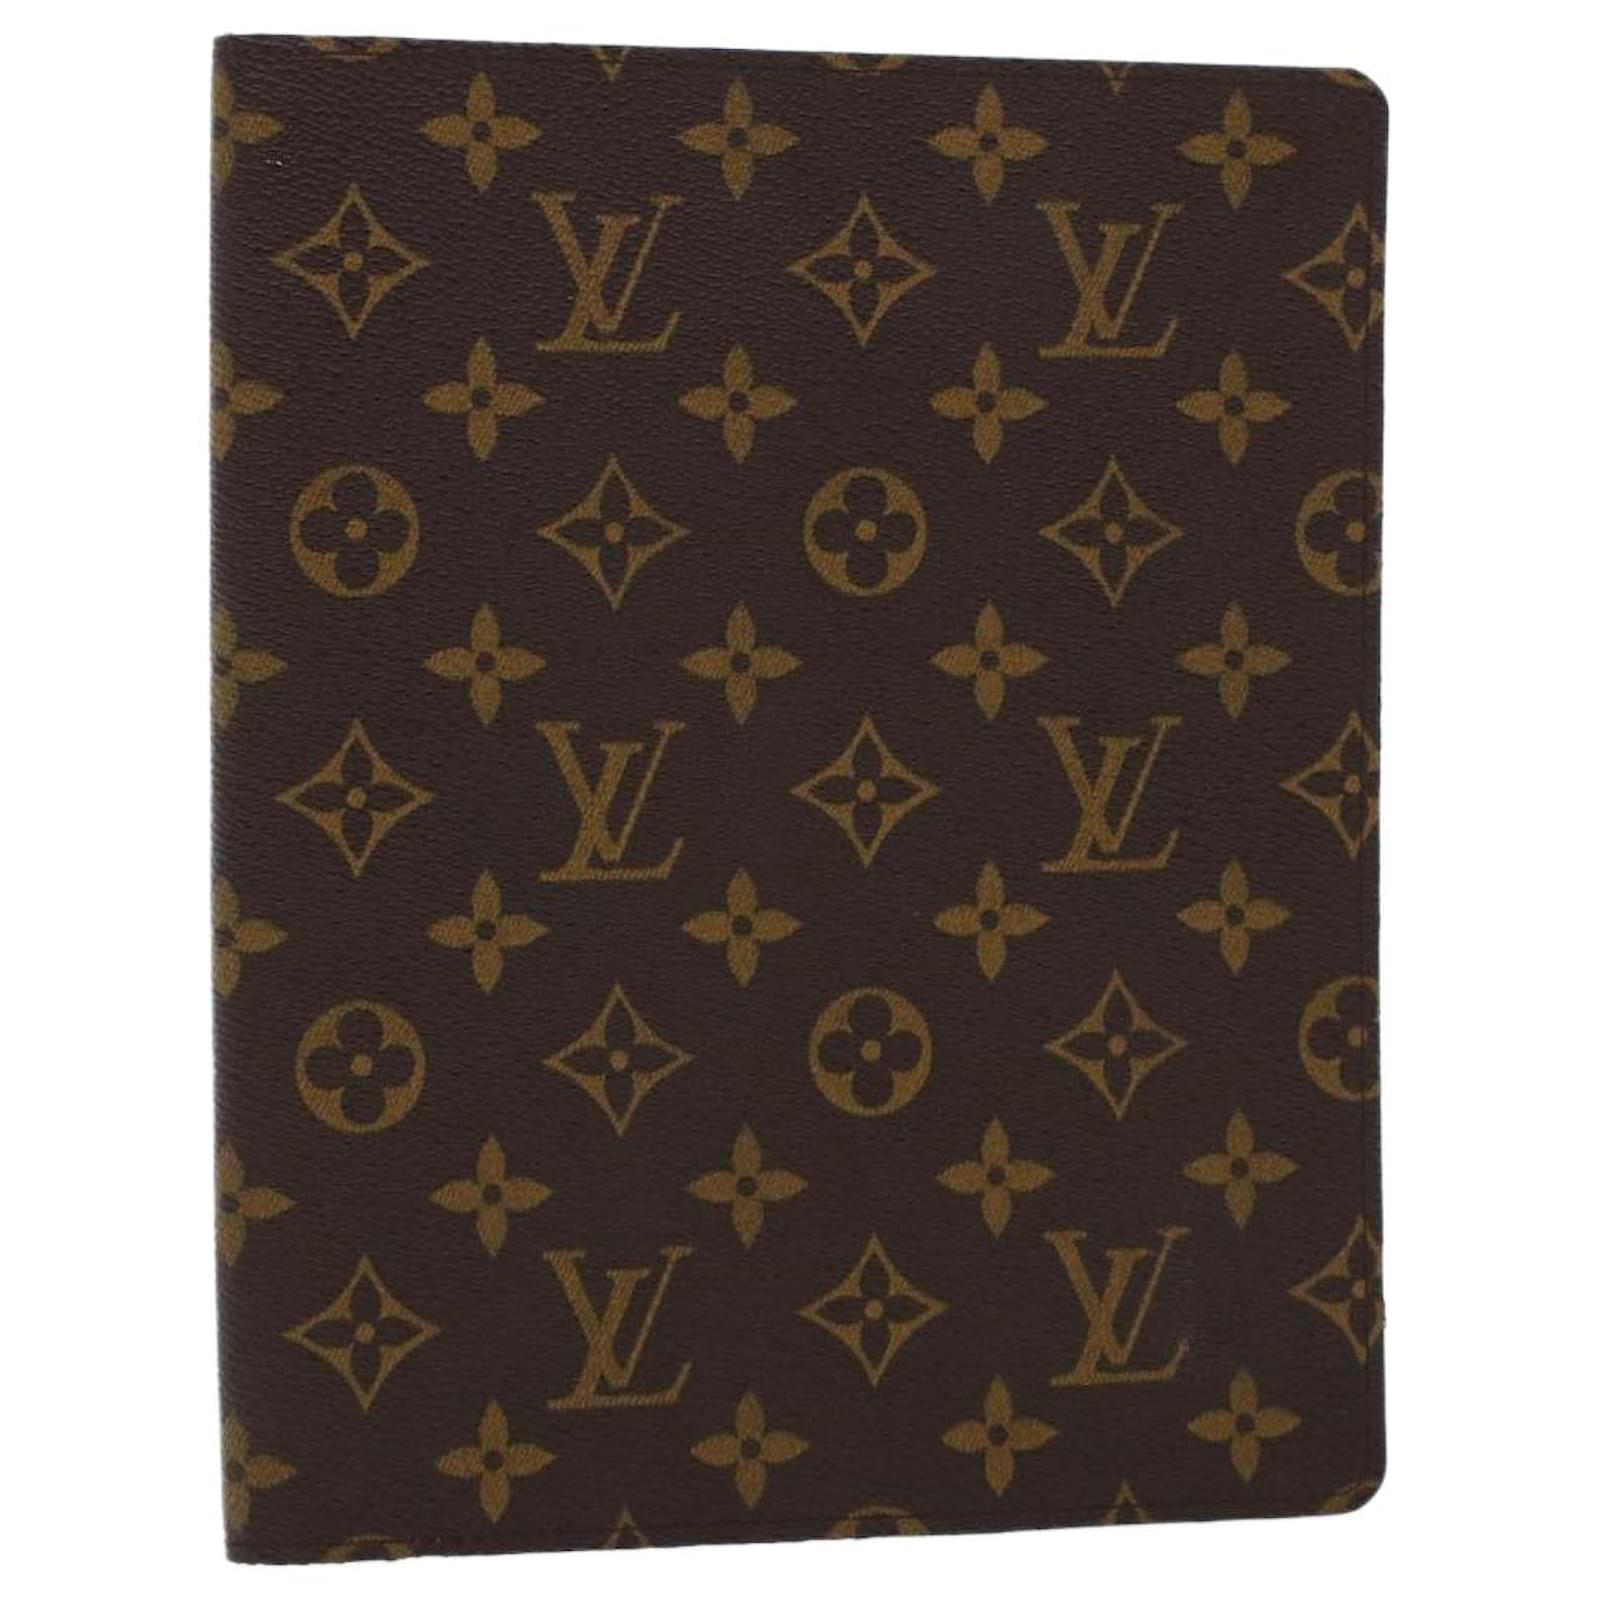 Louis Vuitton Agenda Cover Gold Patent Leather Wallet (Pre-Owned)